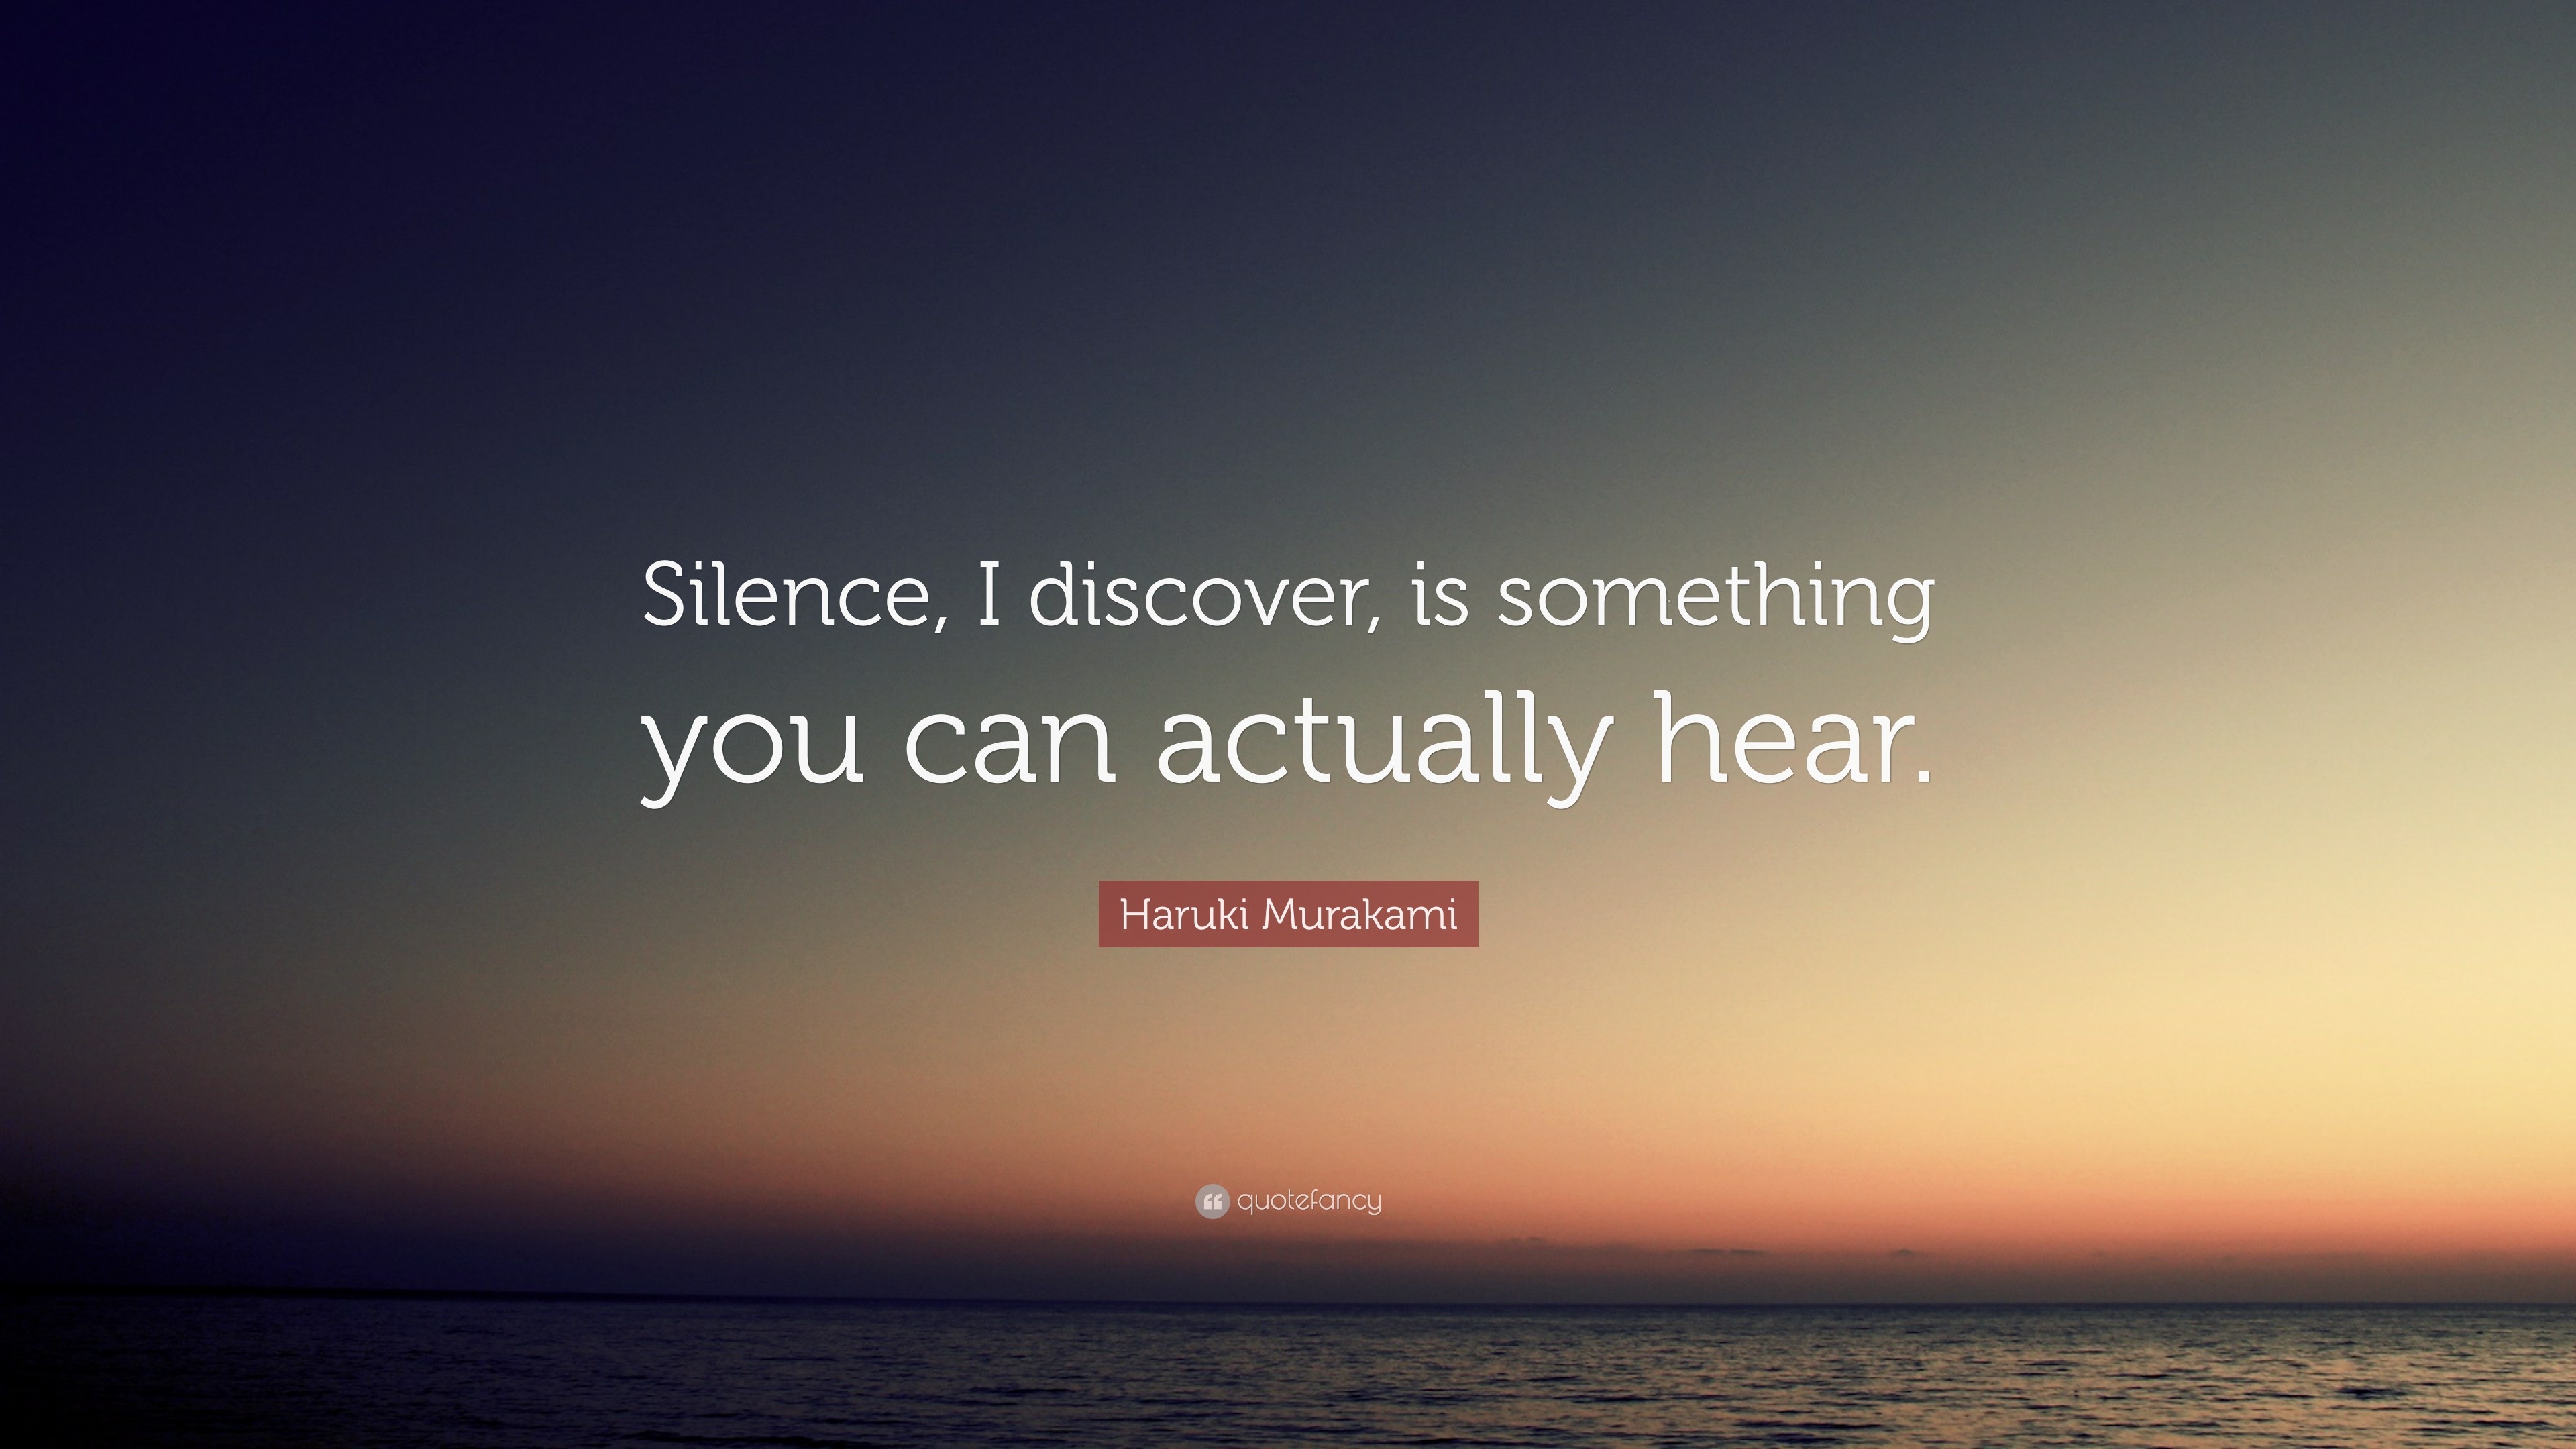 Haruki Murakami Quote: “Silence, I discover, is something you can ...